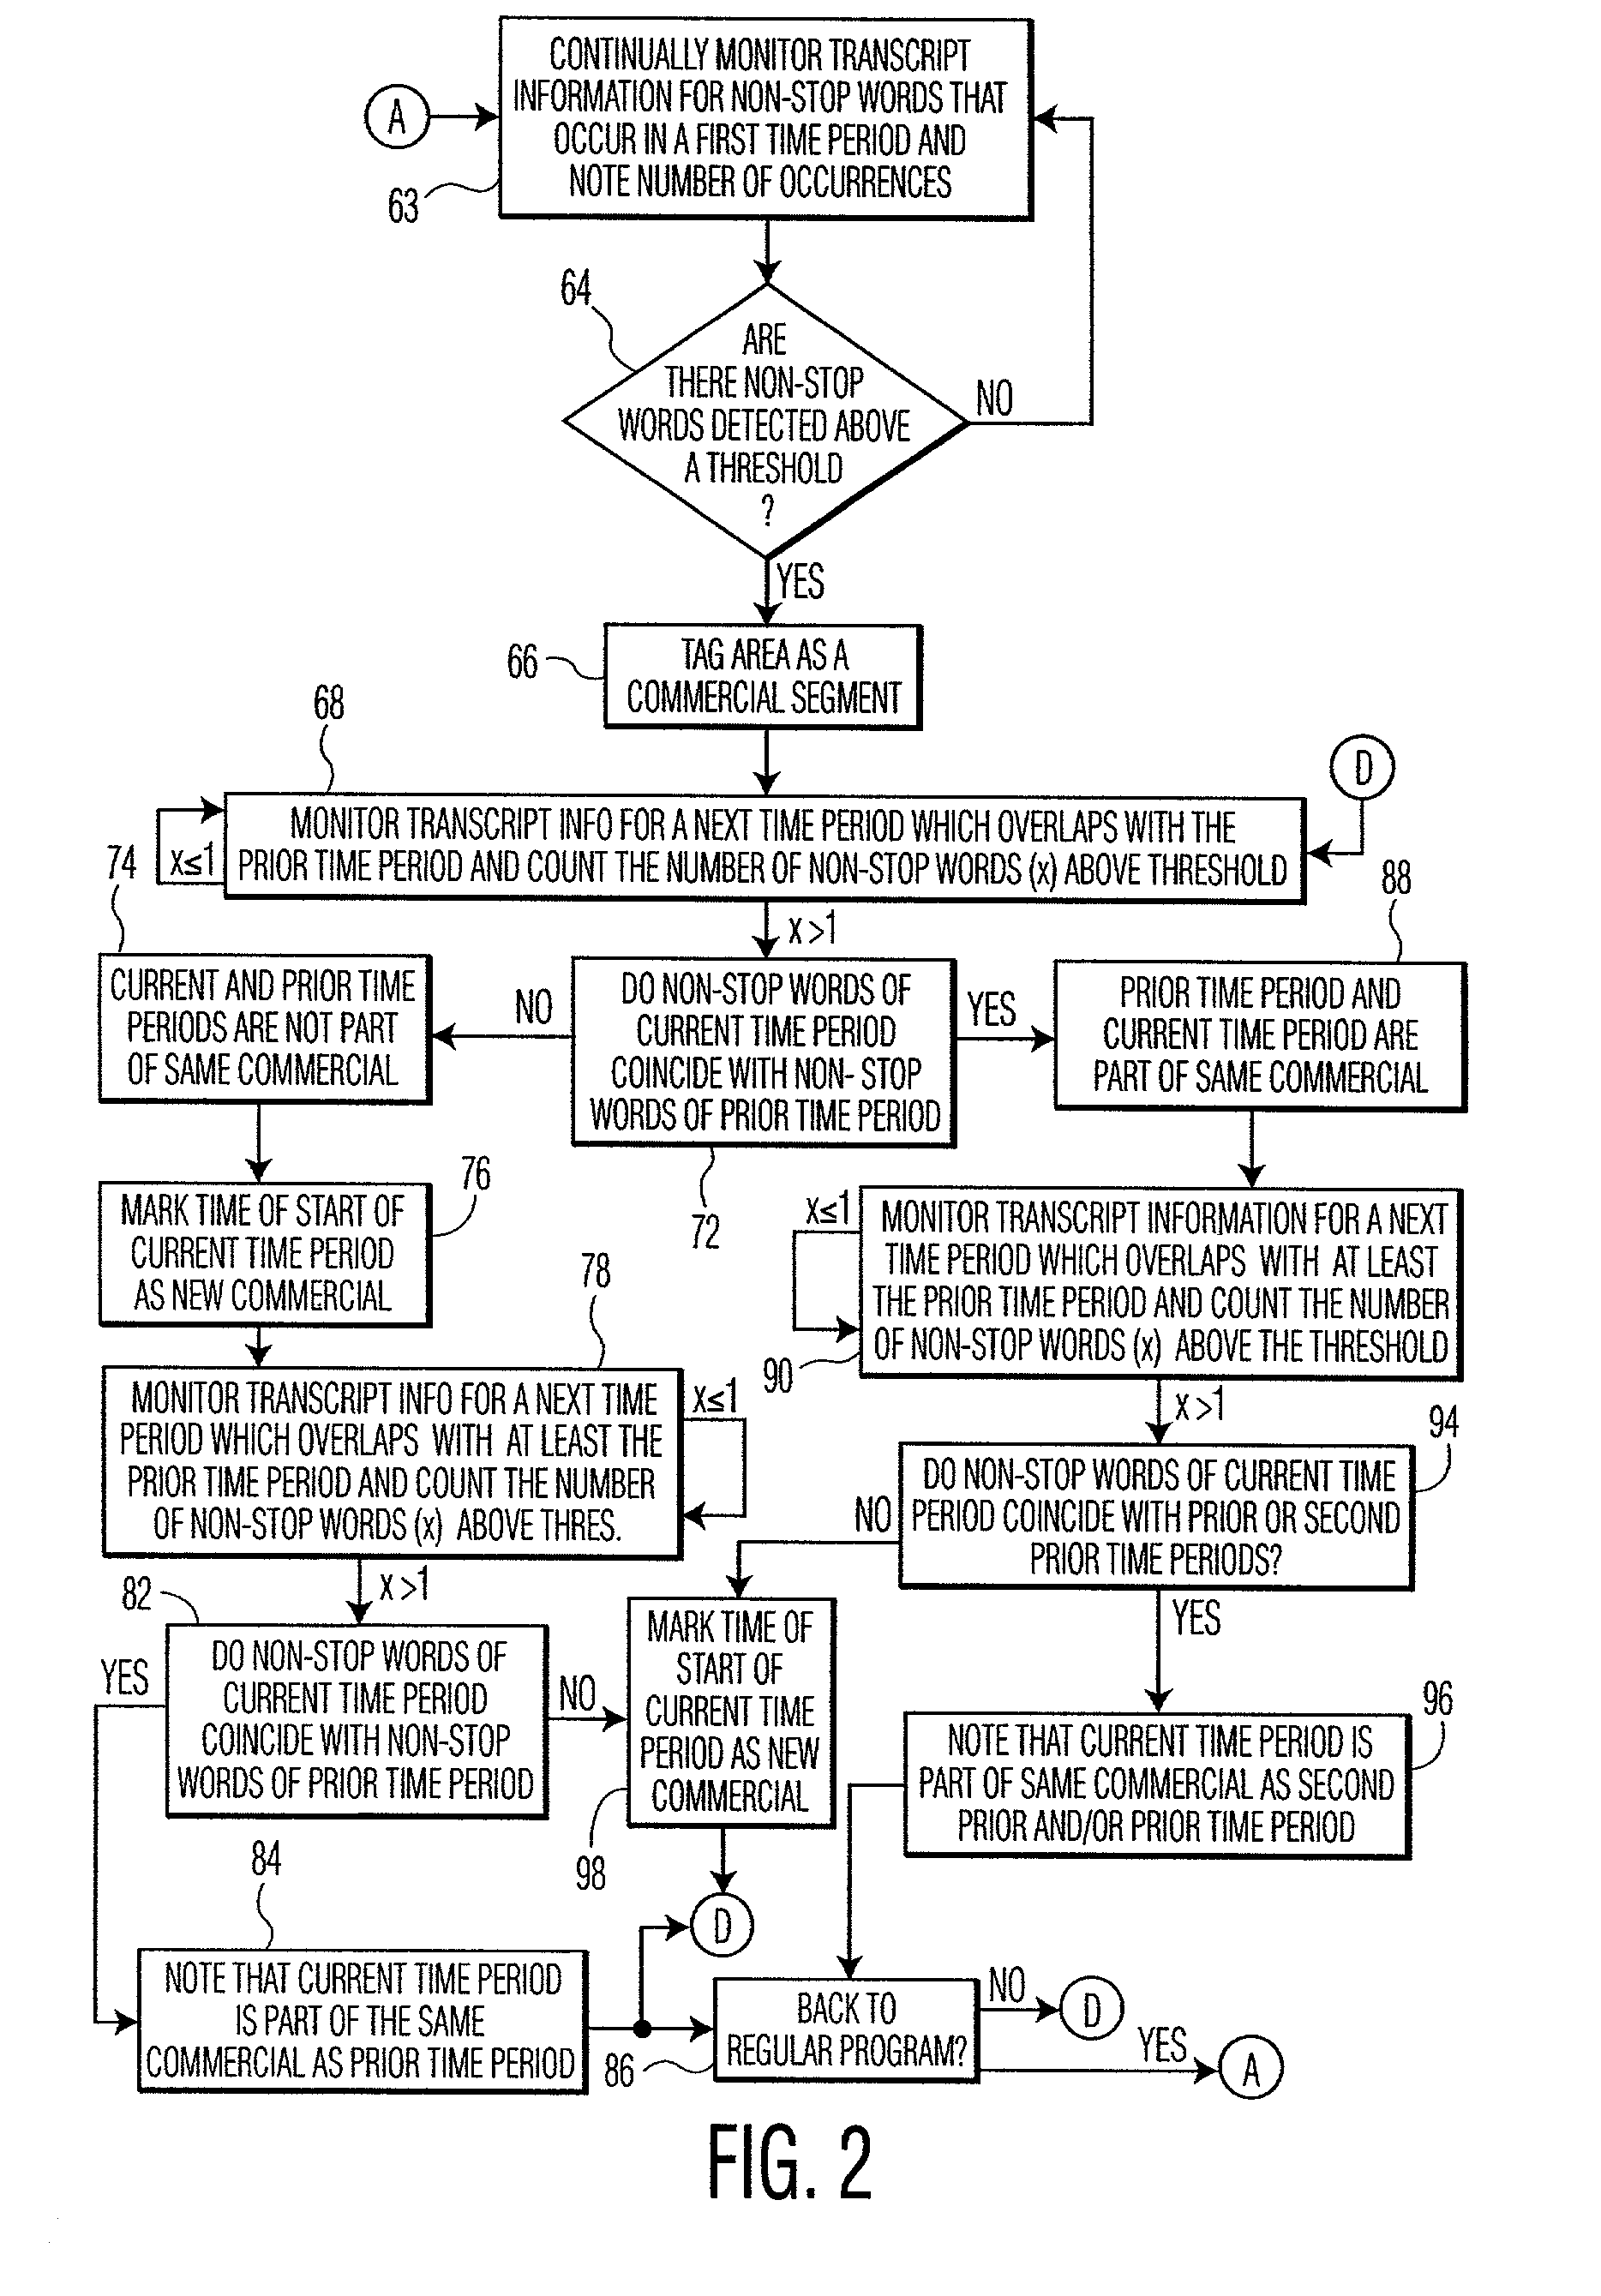 Method of using transcript information to identify and learn commercial portions of a program